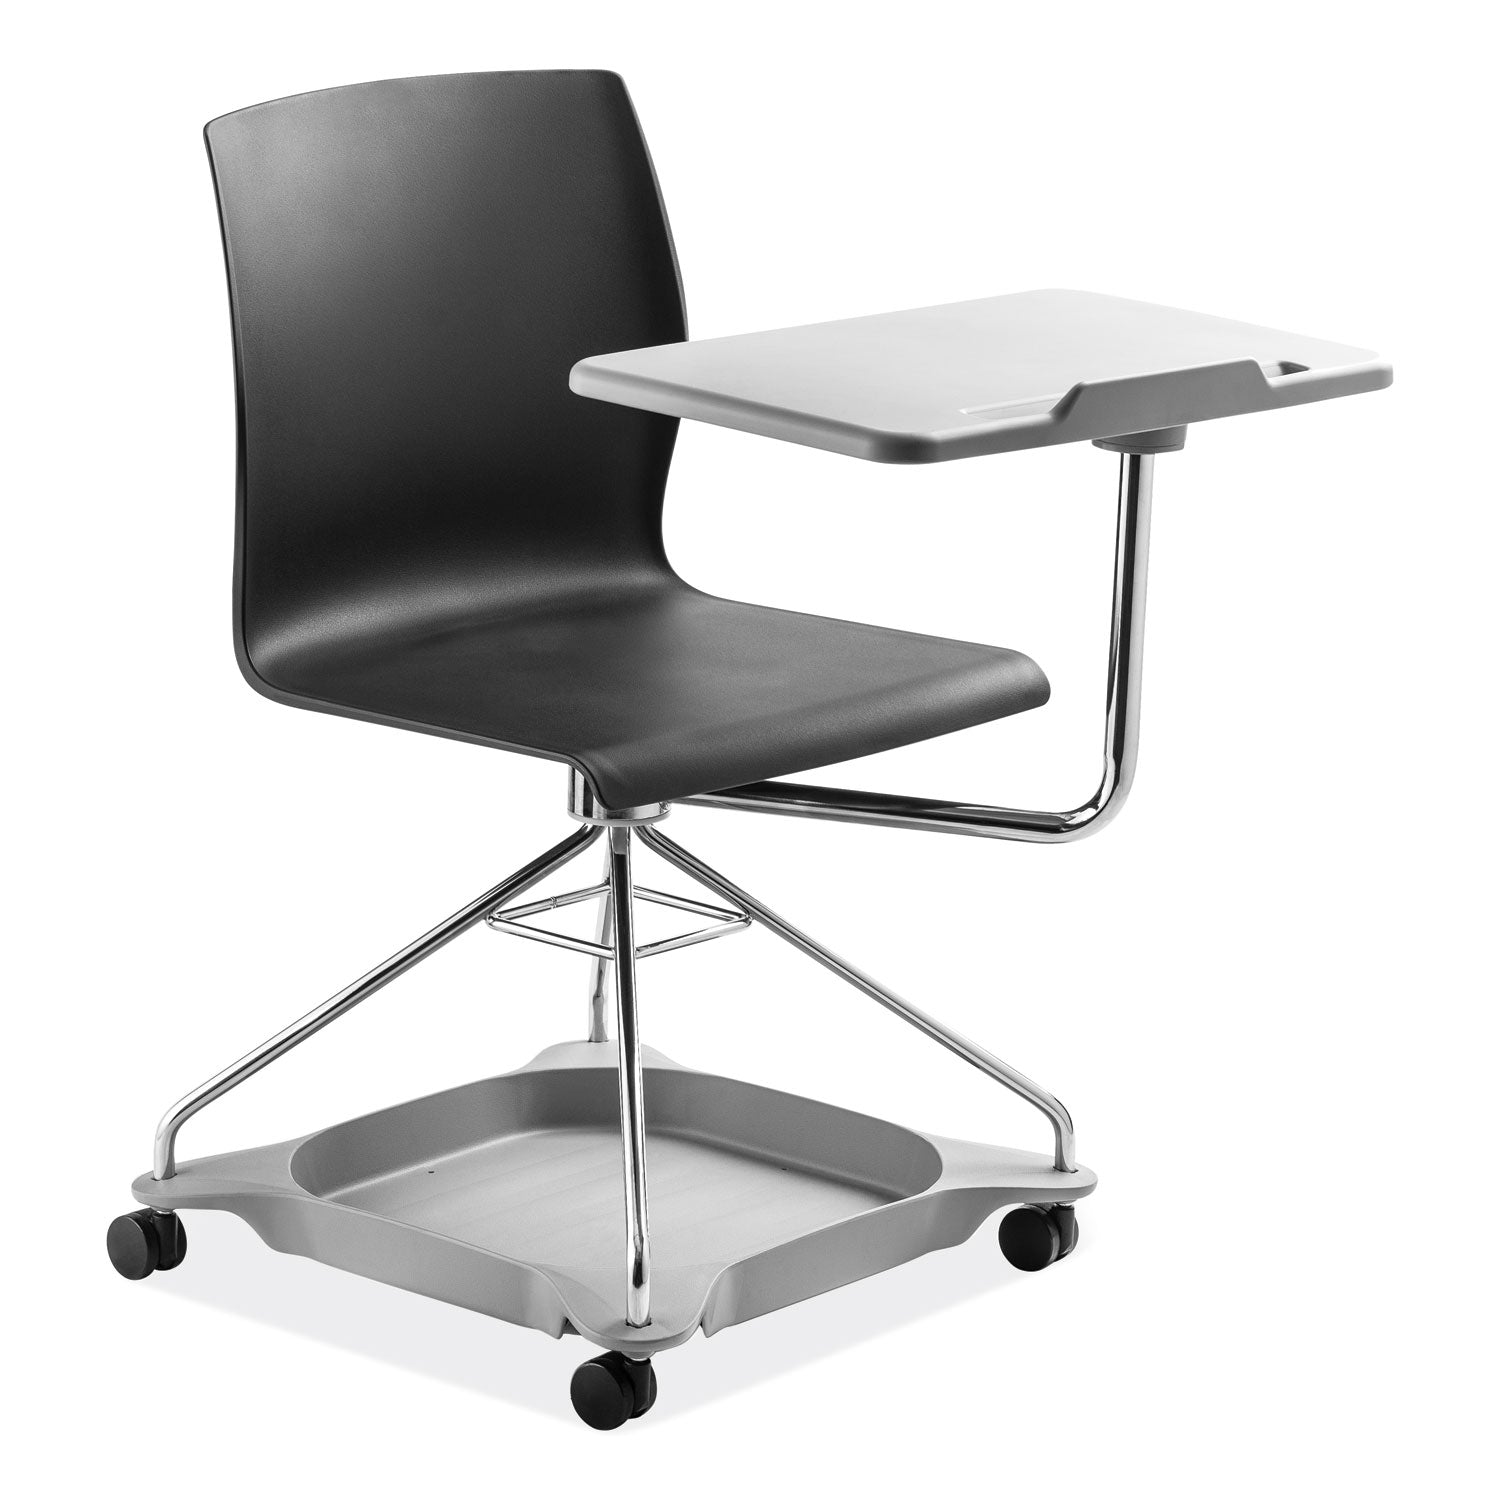 cogo-mobile-tablet-chair-supports-up-to-440-lb-1875-seat-height-black-seat-back-chrome-frameships-in-1-3-business-days_npscogo10 - 4